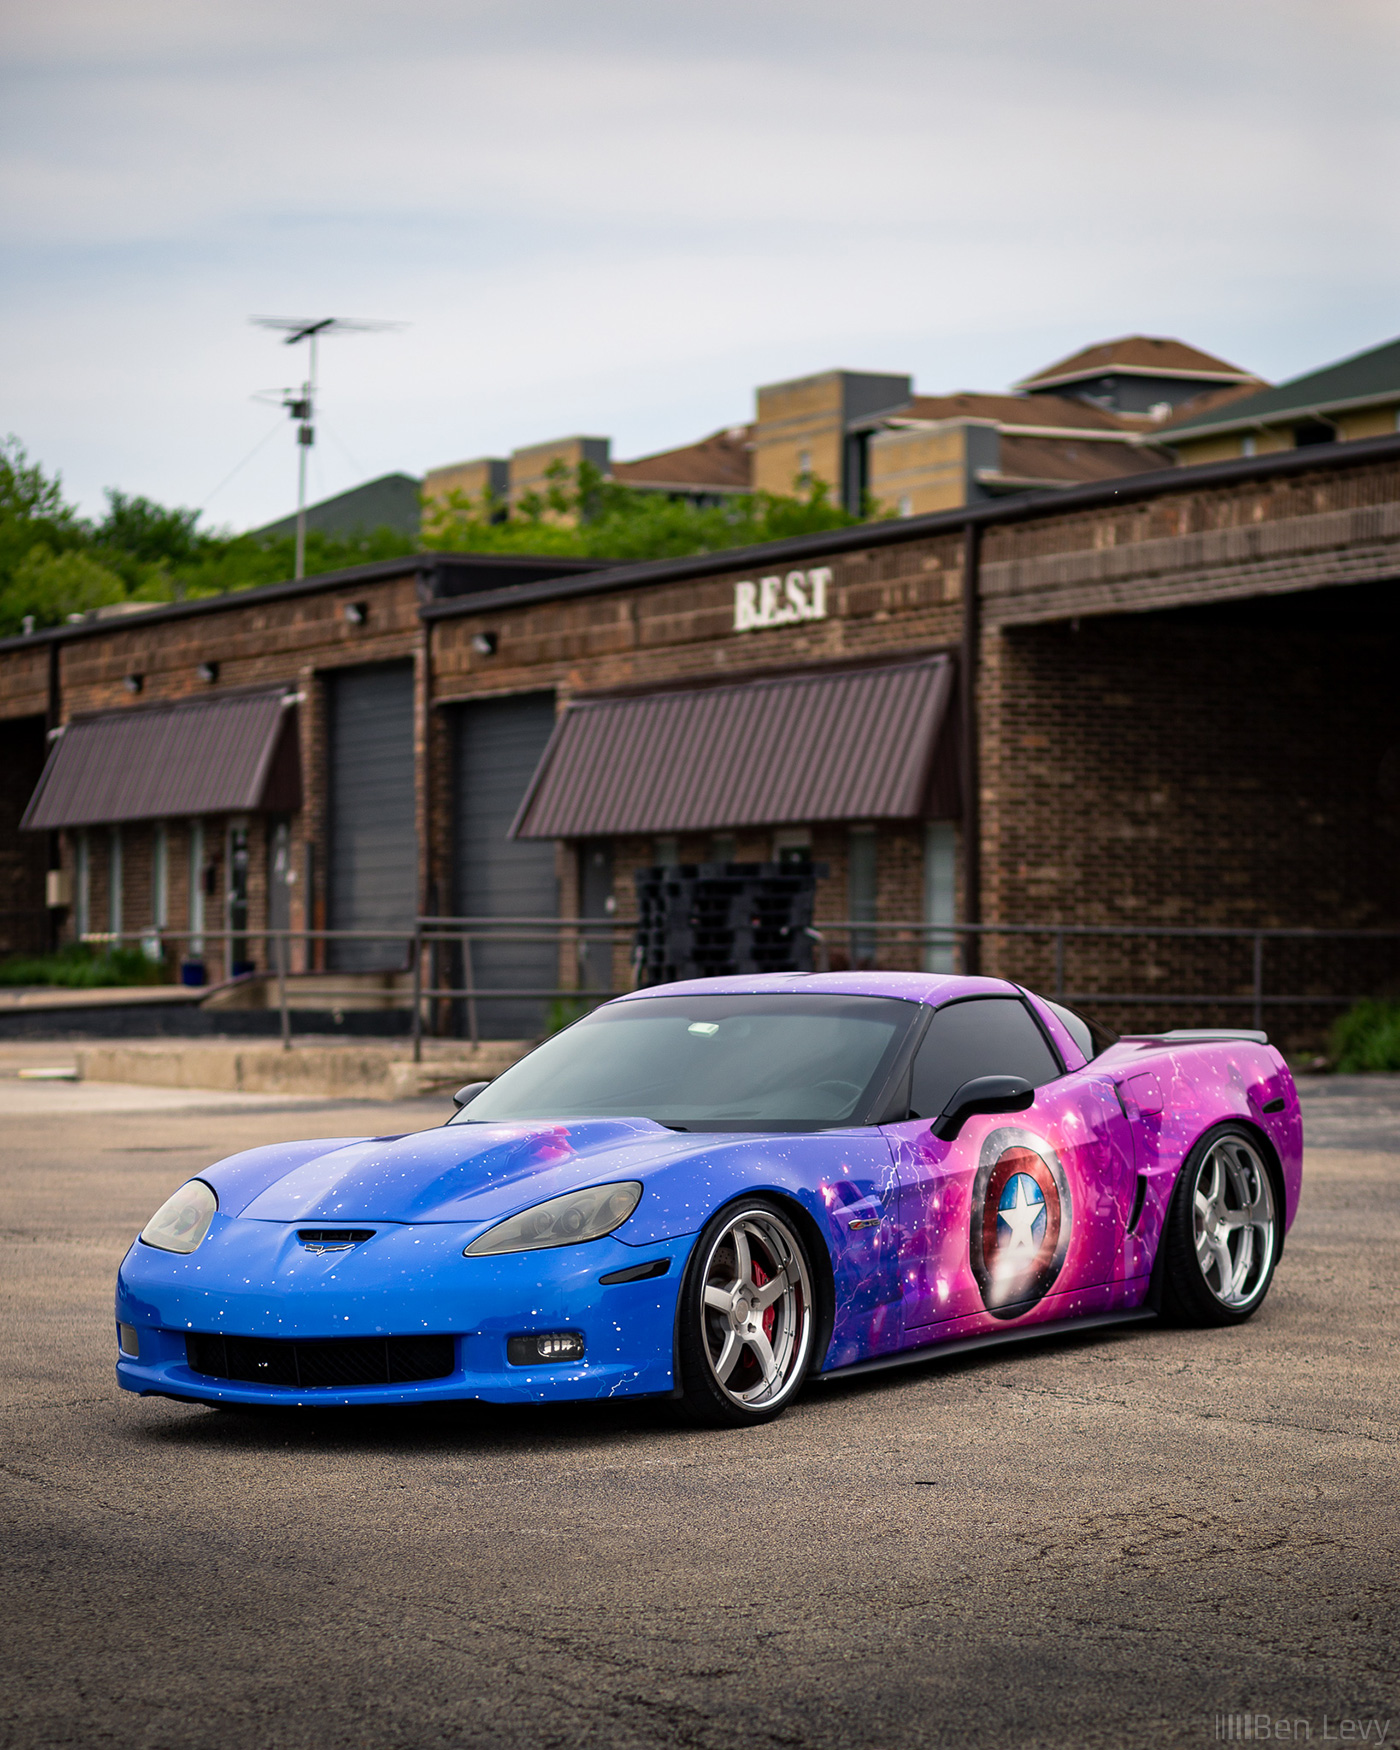 Wrapped C6 Corvette on Modulare Forged C17 Evo 3-Piece Wheels